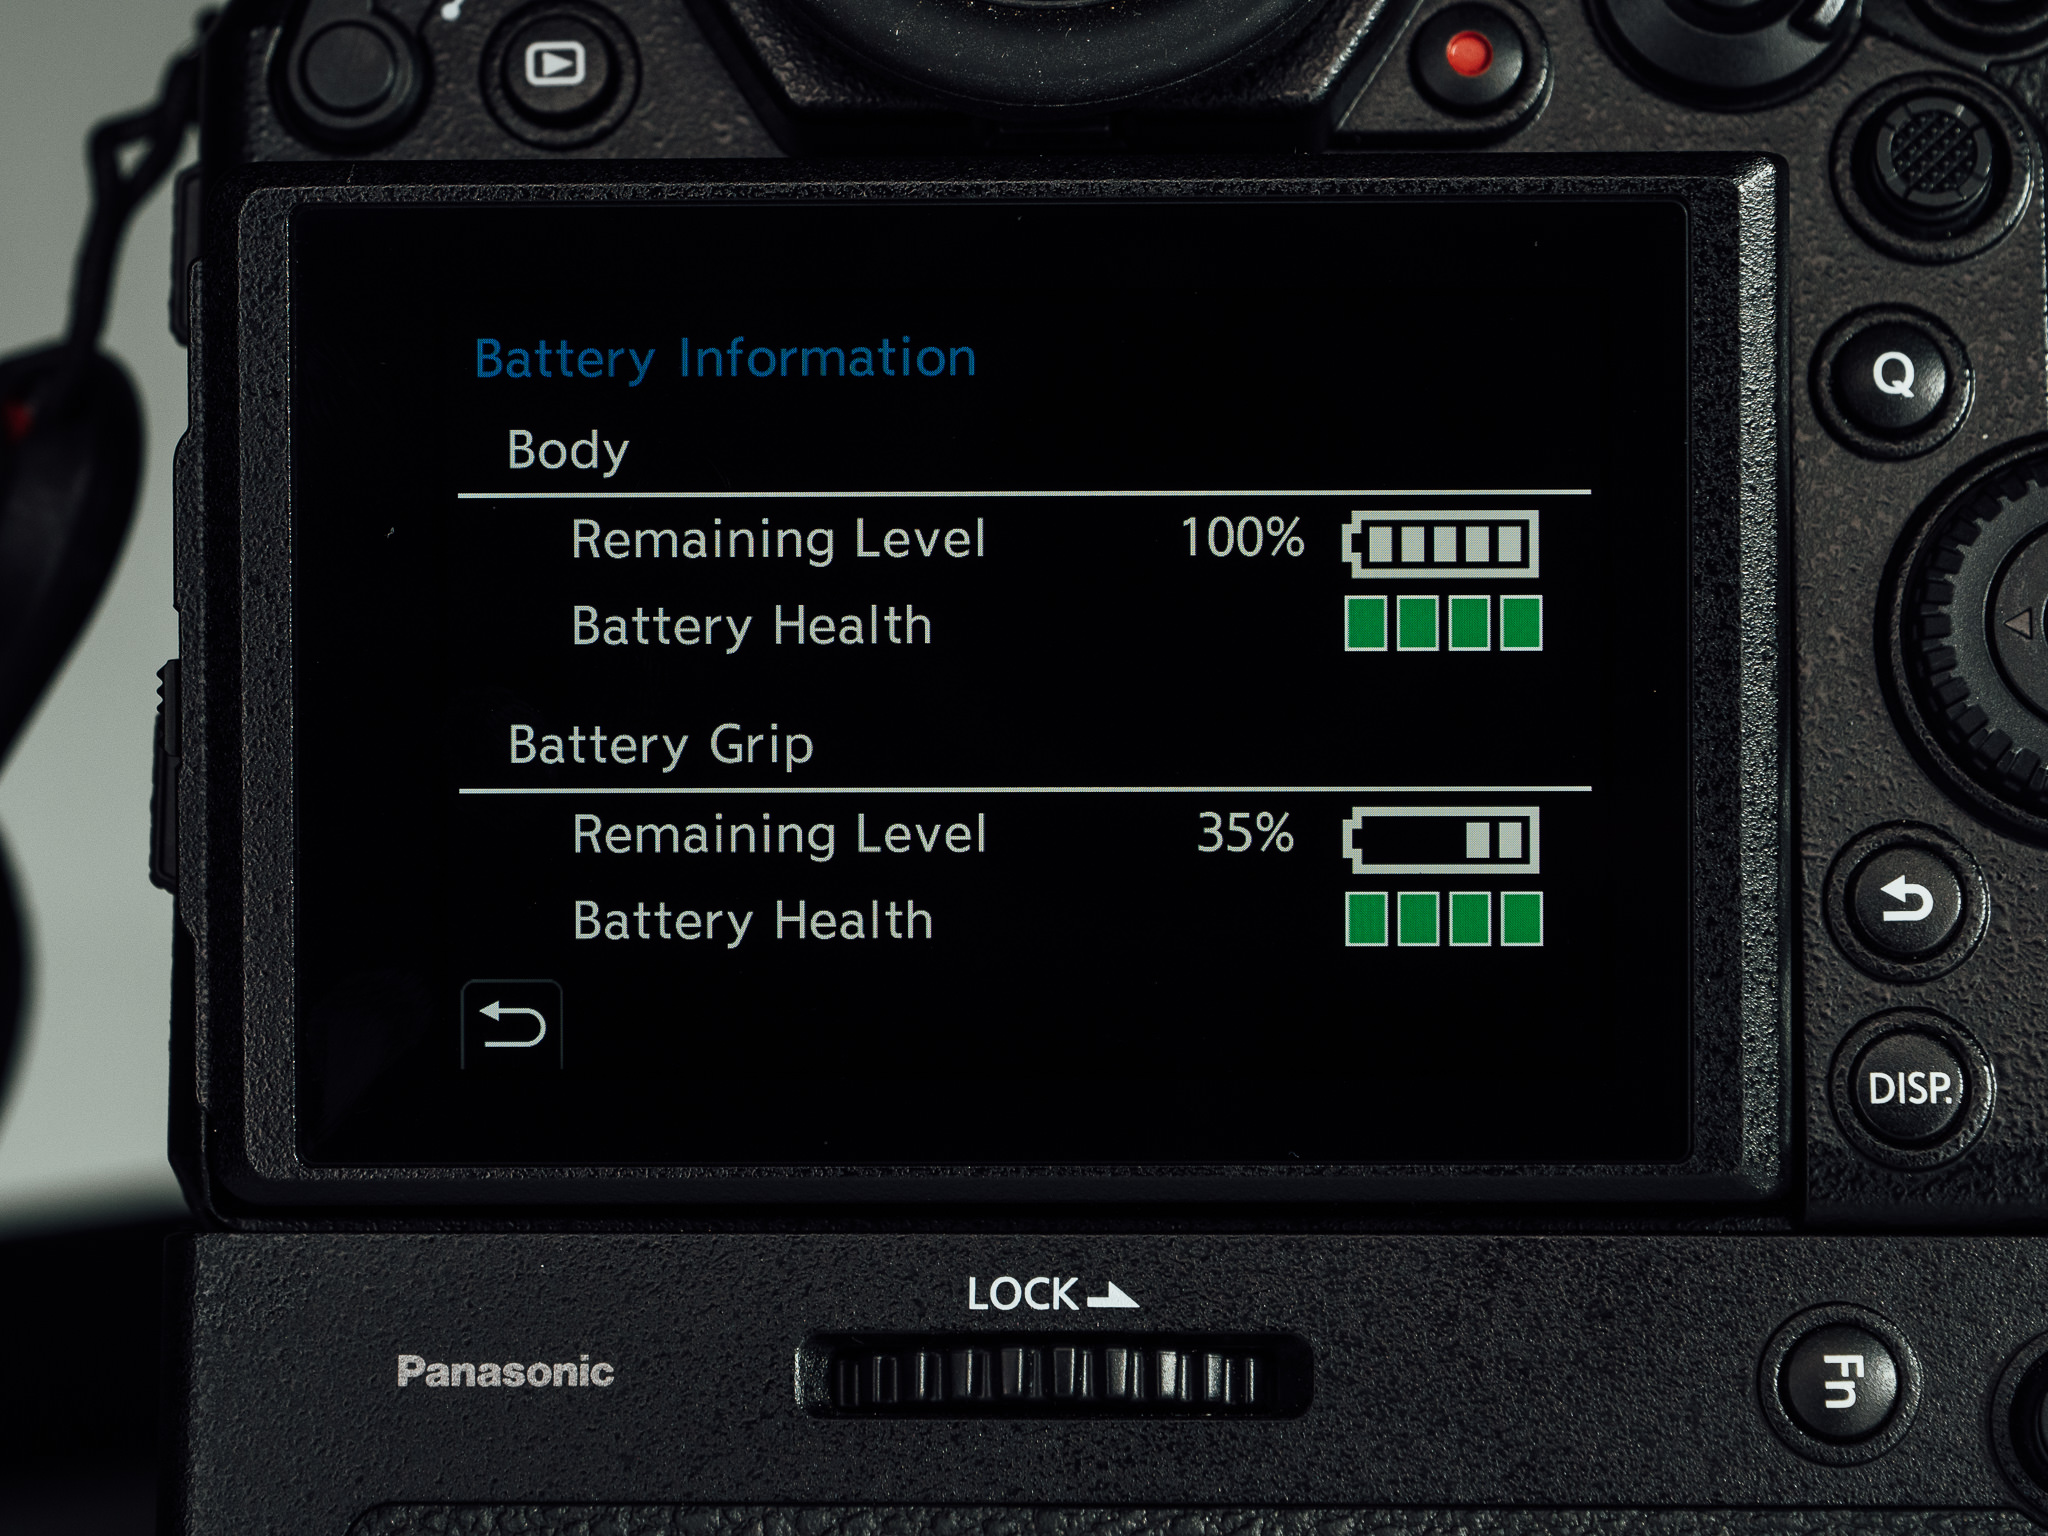 Battery information shows the remaining battery level and the battery health of each battery in the LUMIX S1 or S1R